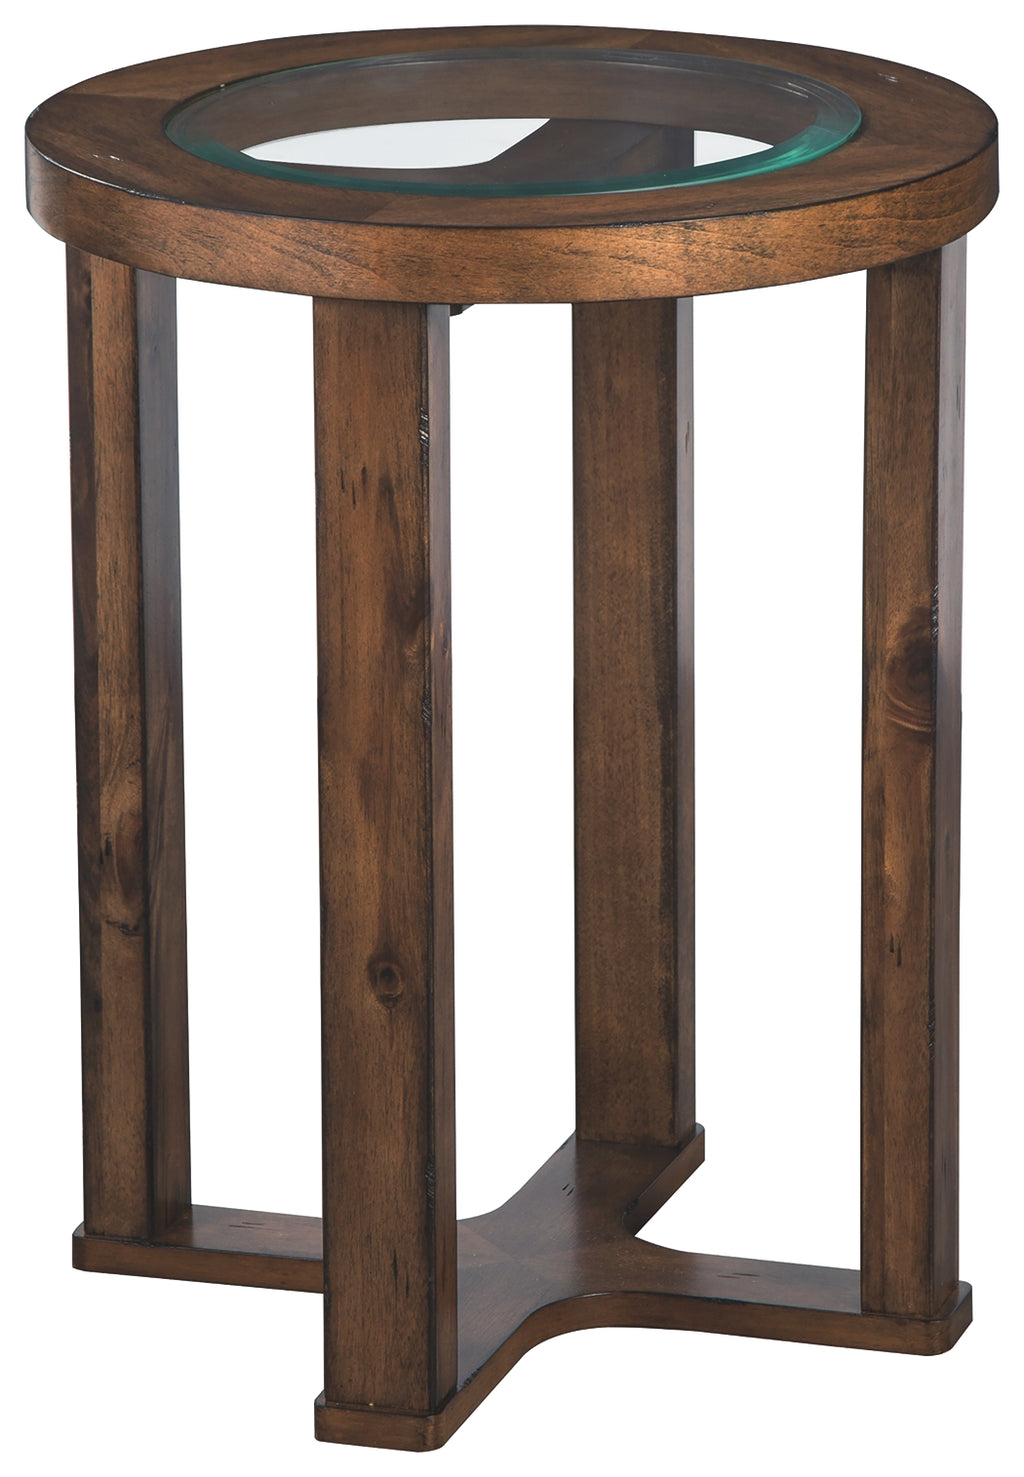 Hannery T725-6 Brown Round End Table